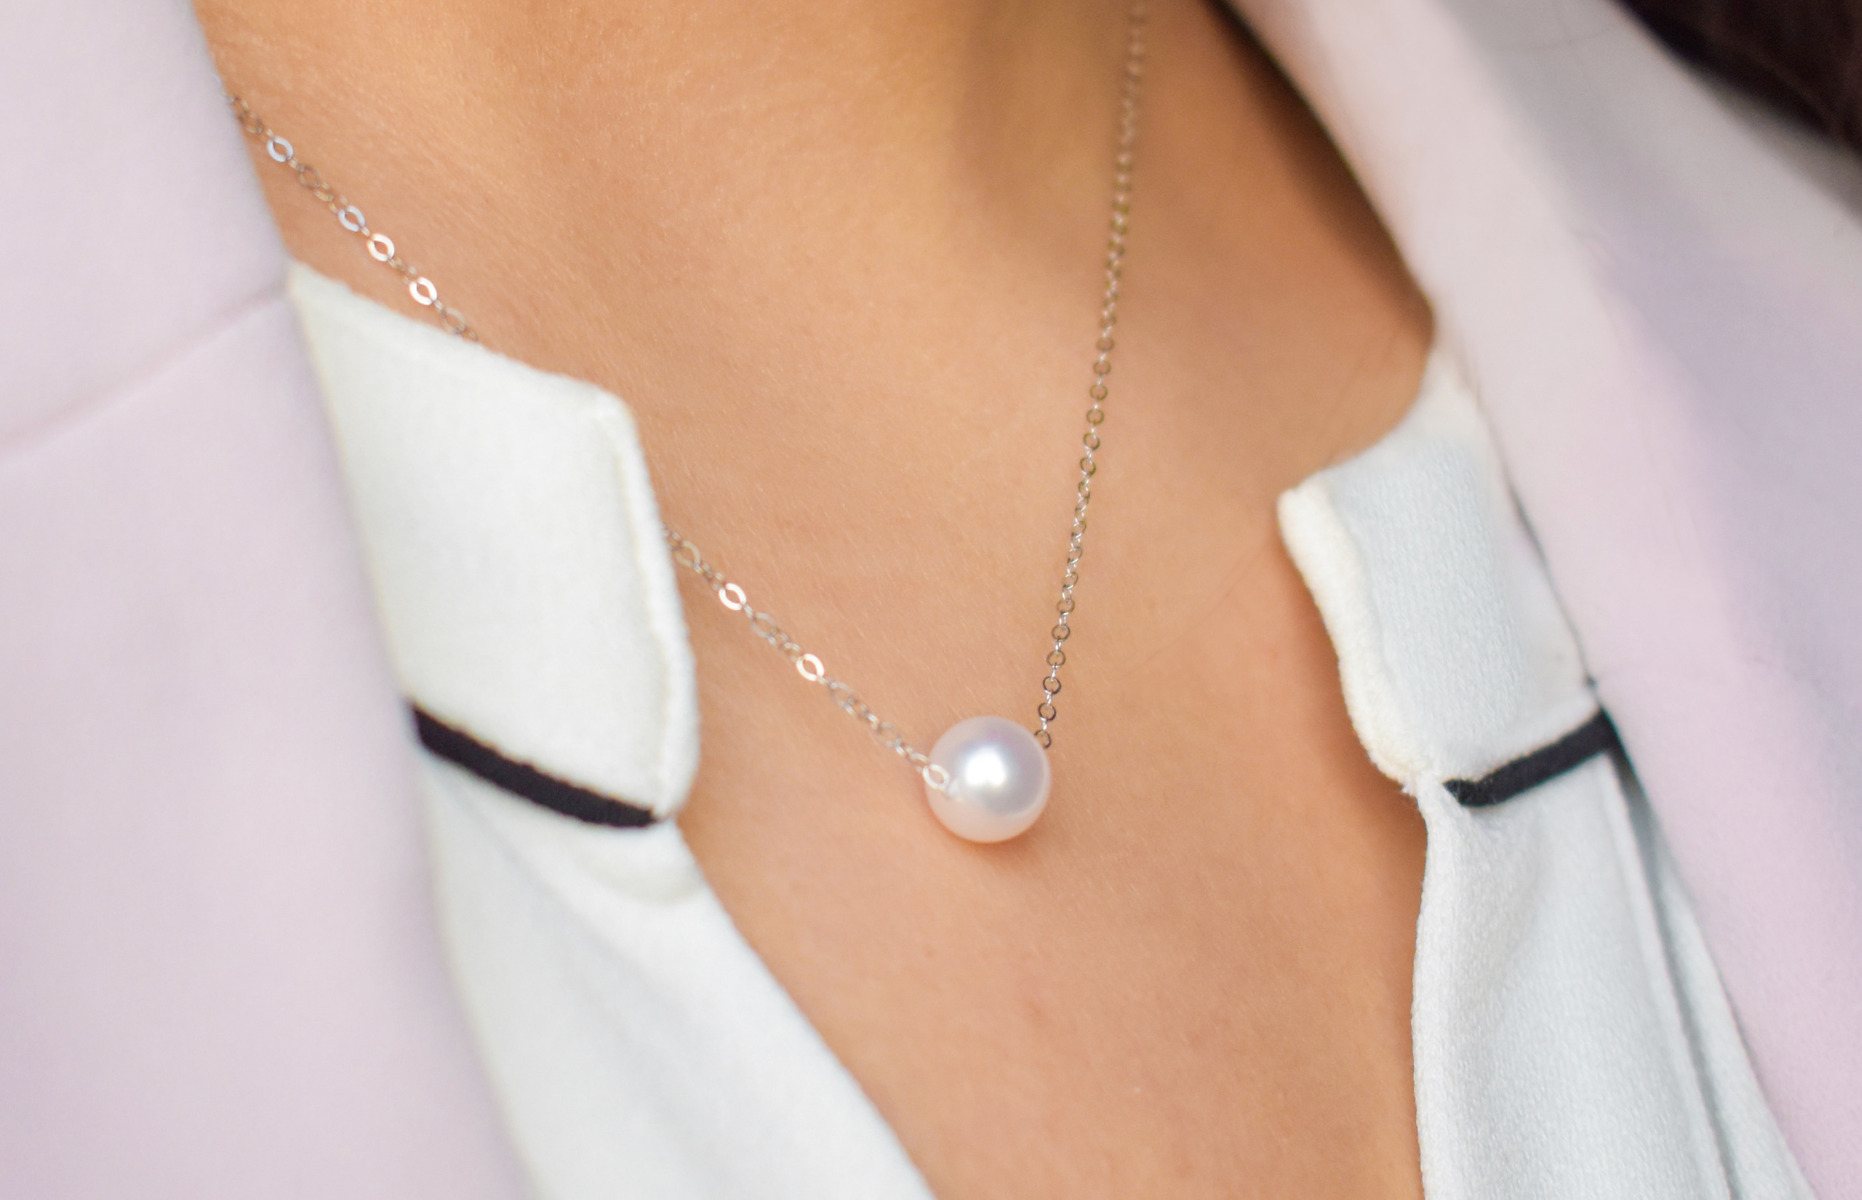 1 Pearl Necklace with a 6.5mm on a 14k white gold chain